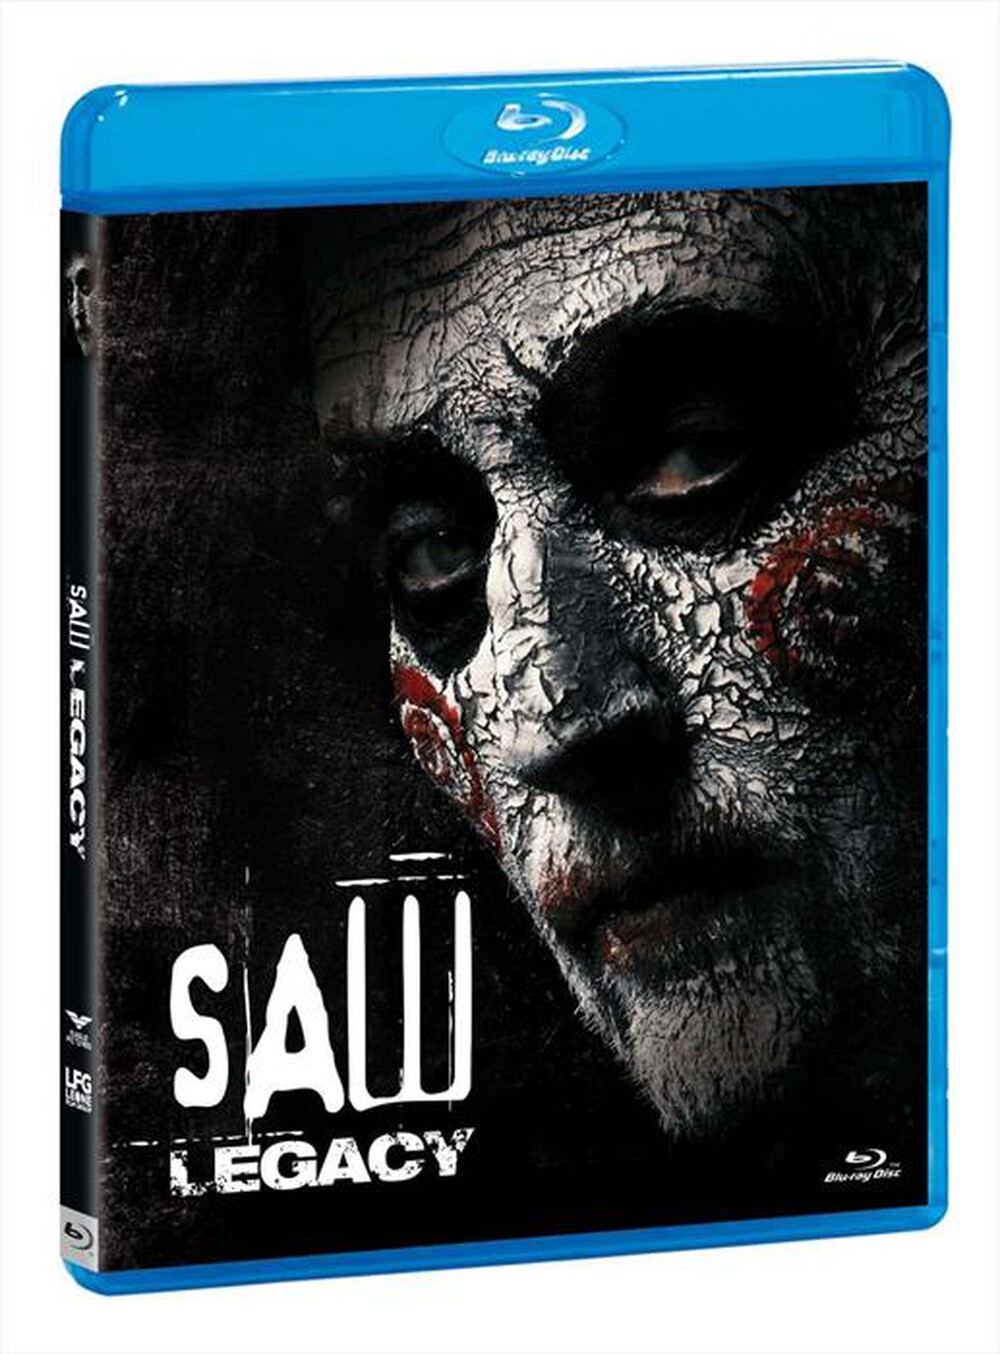 "EAGLE PICTURES - Saw: Legacy"